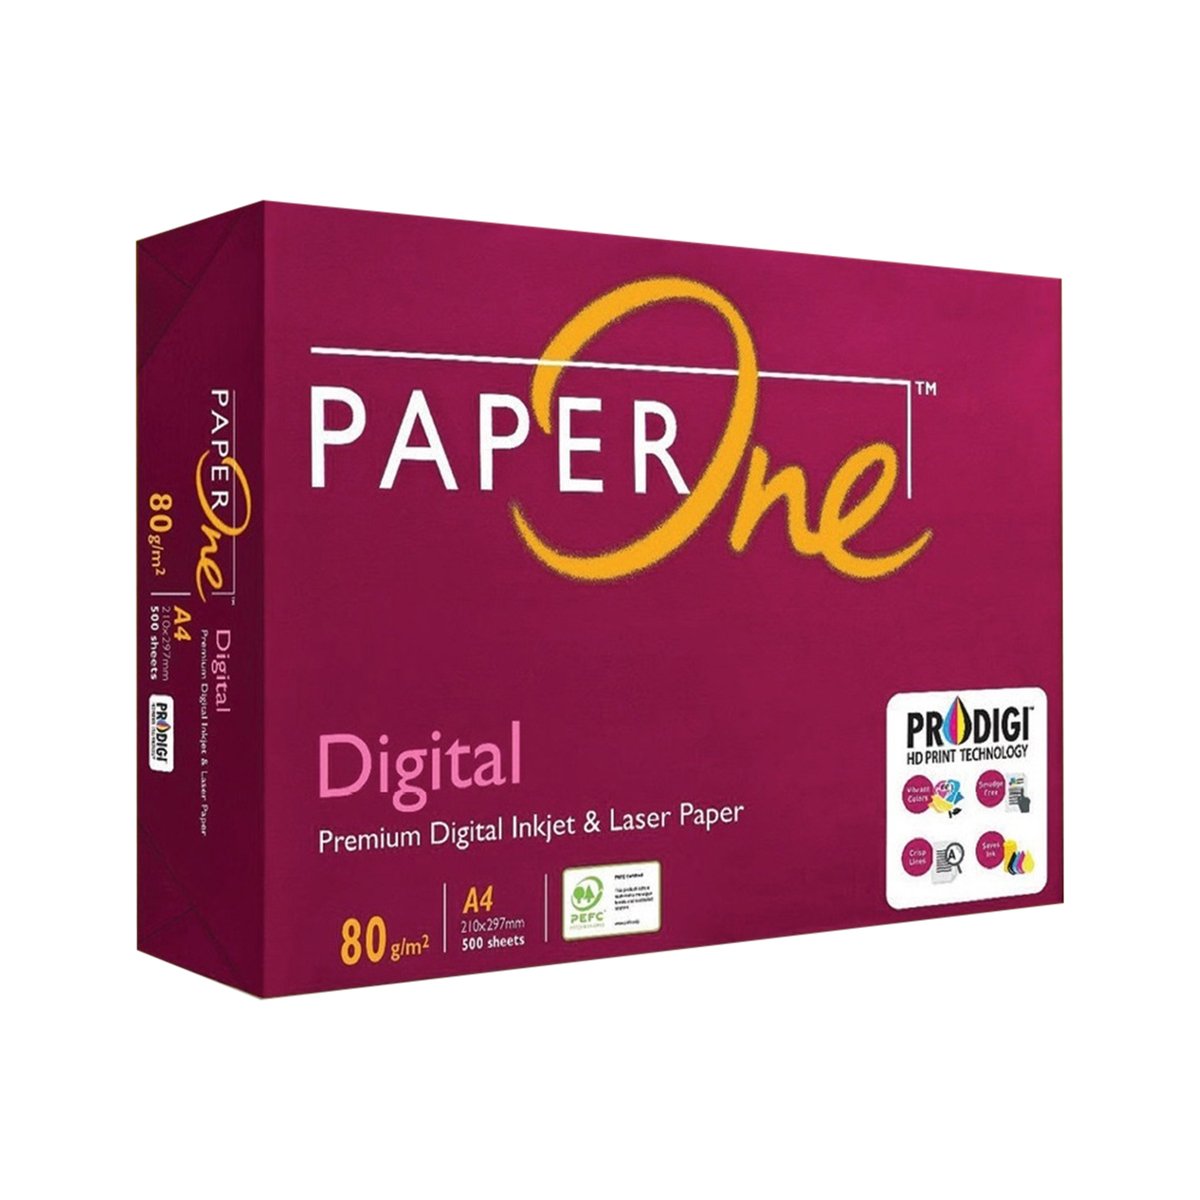 A4 Copy Paper for Printing/ Best Price A4 Paper - China A4 Paper, A4 Paper  80 GSM